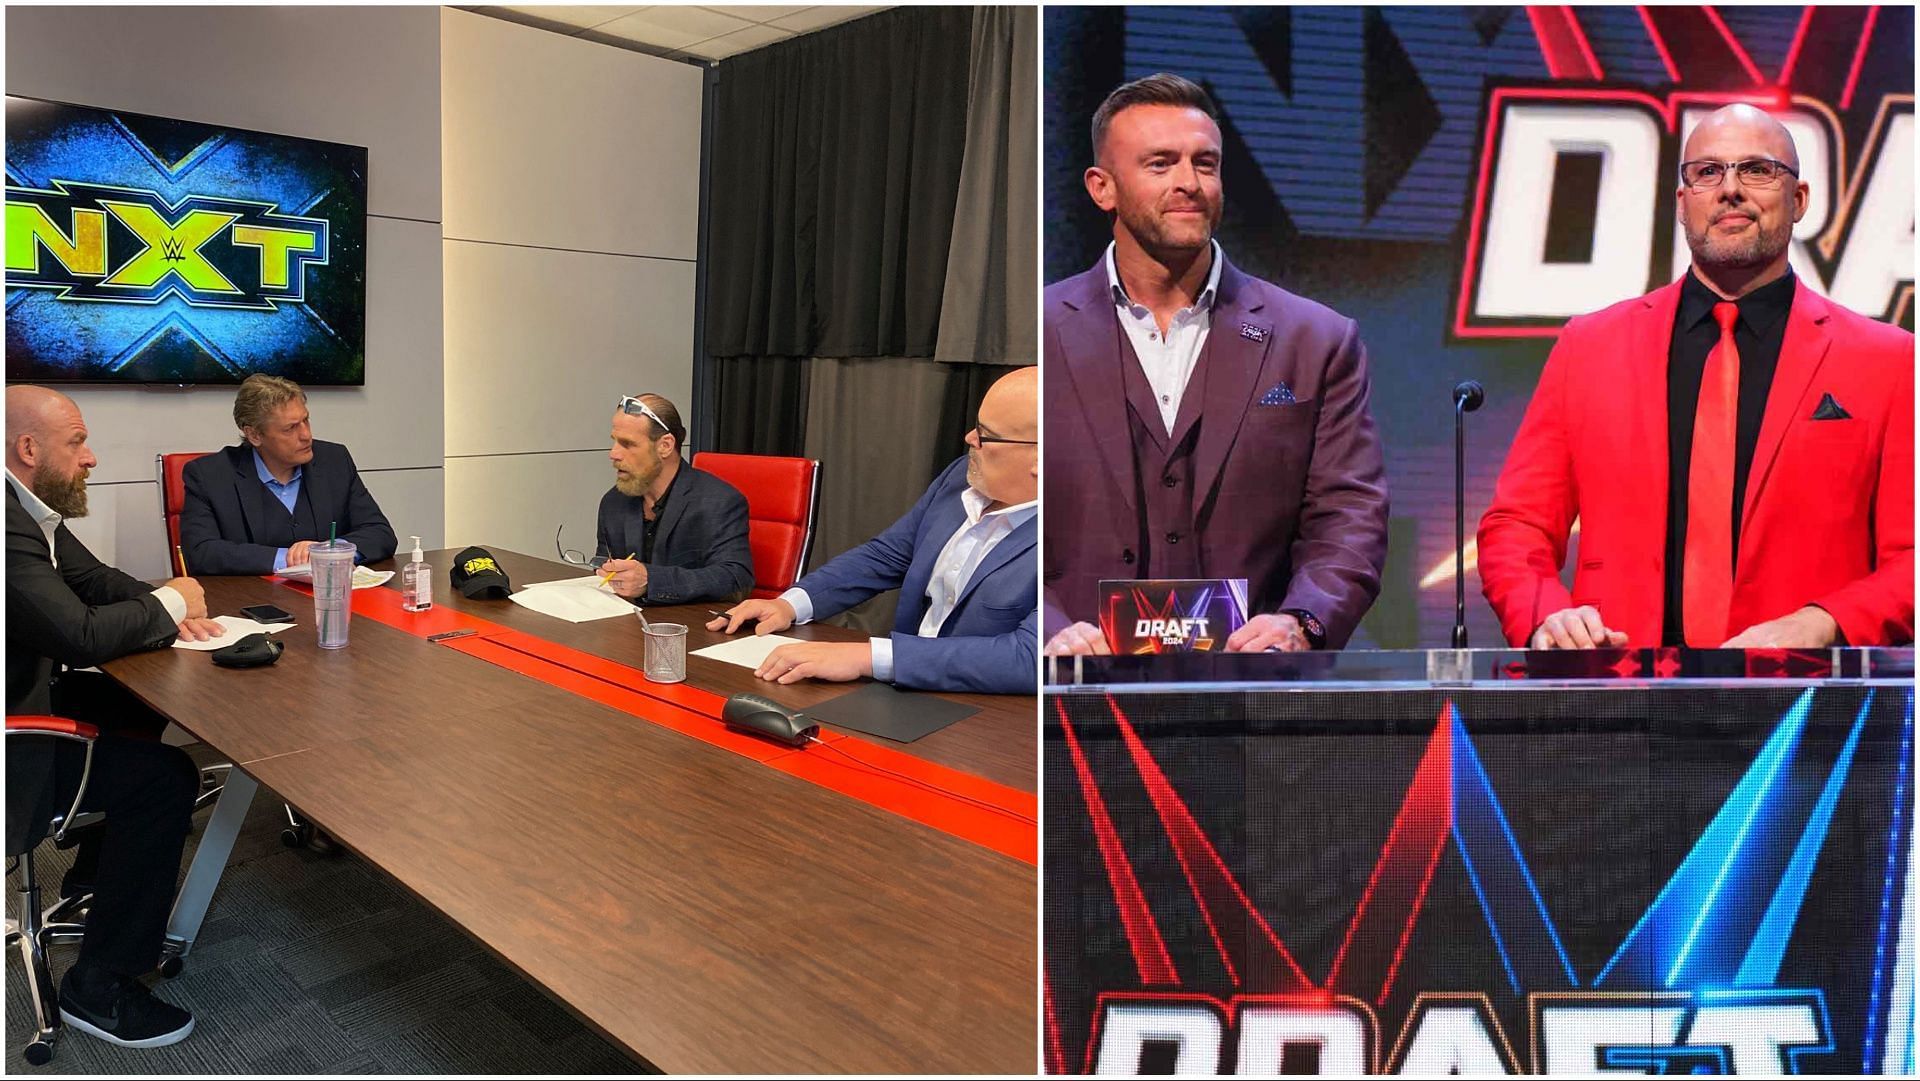 WWE officials discuss NXT releases, Nick Aldis and Adam Pearce at the WWE Draft